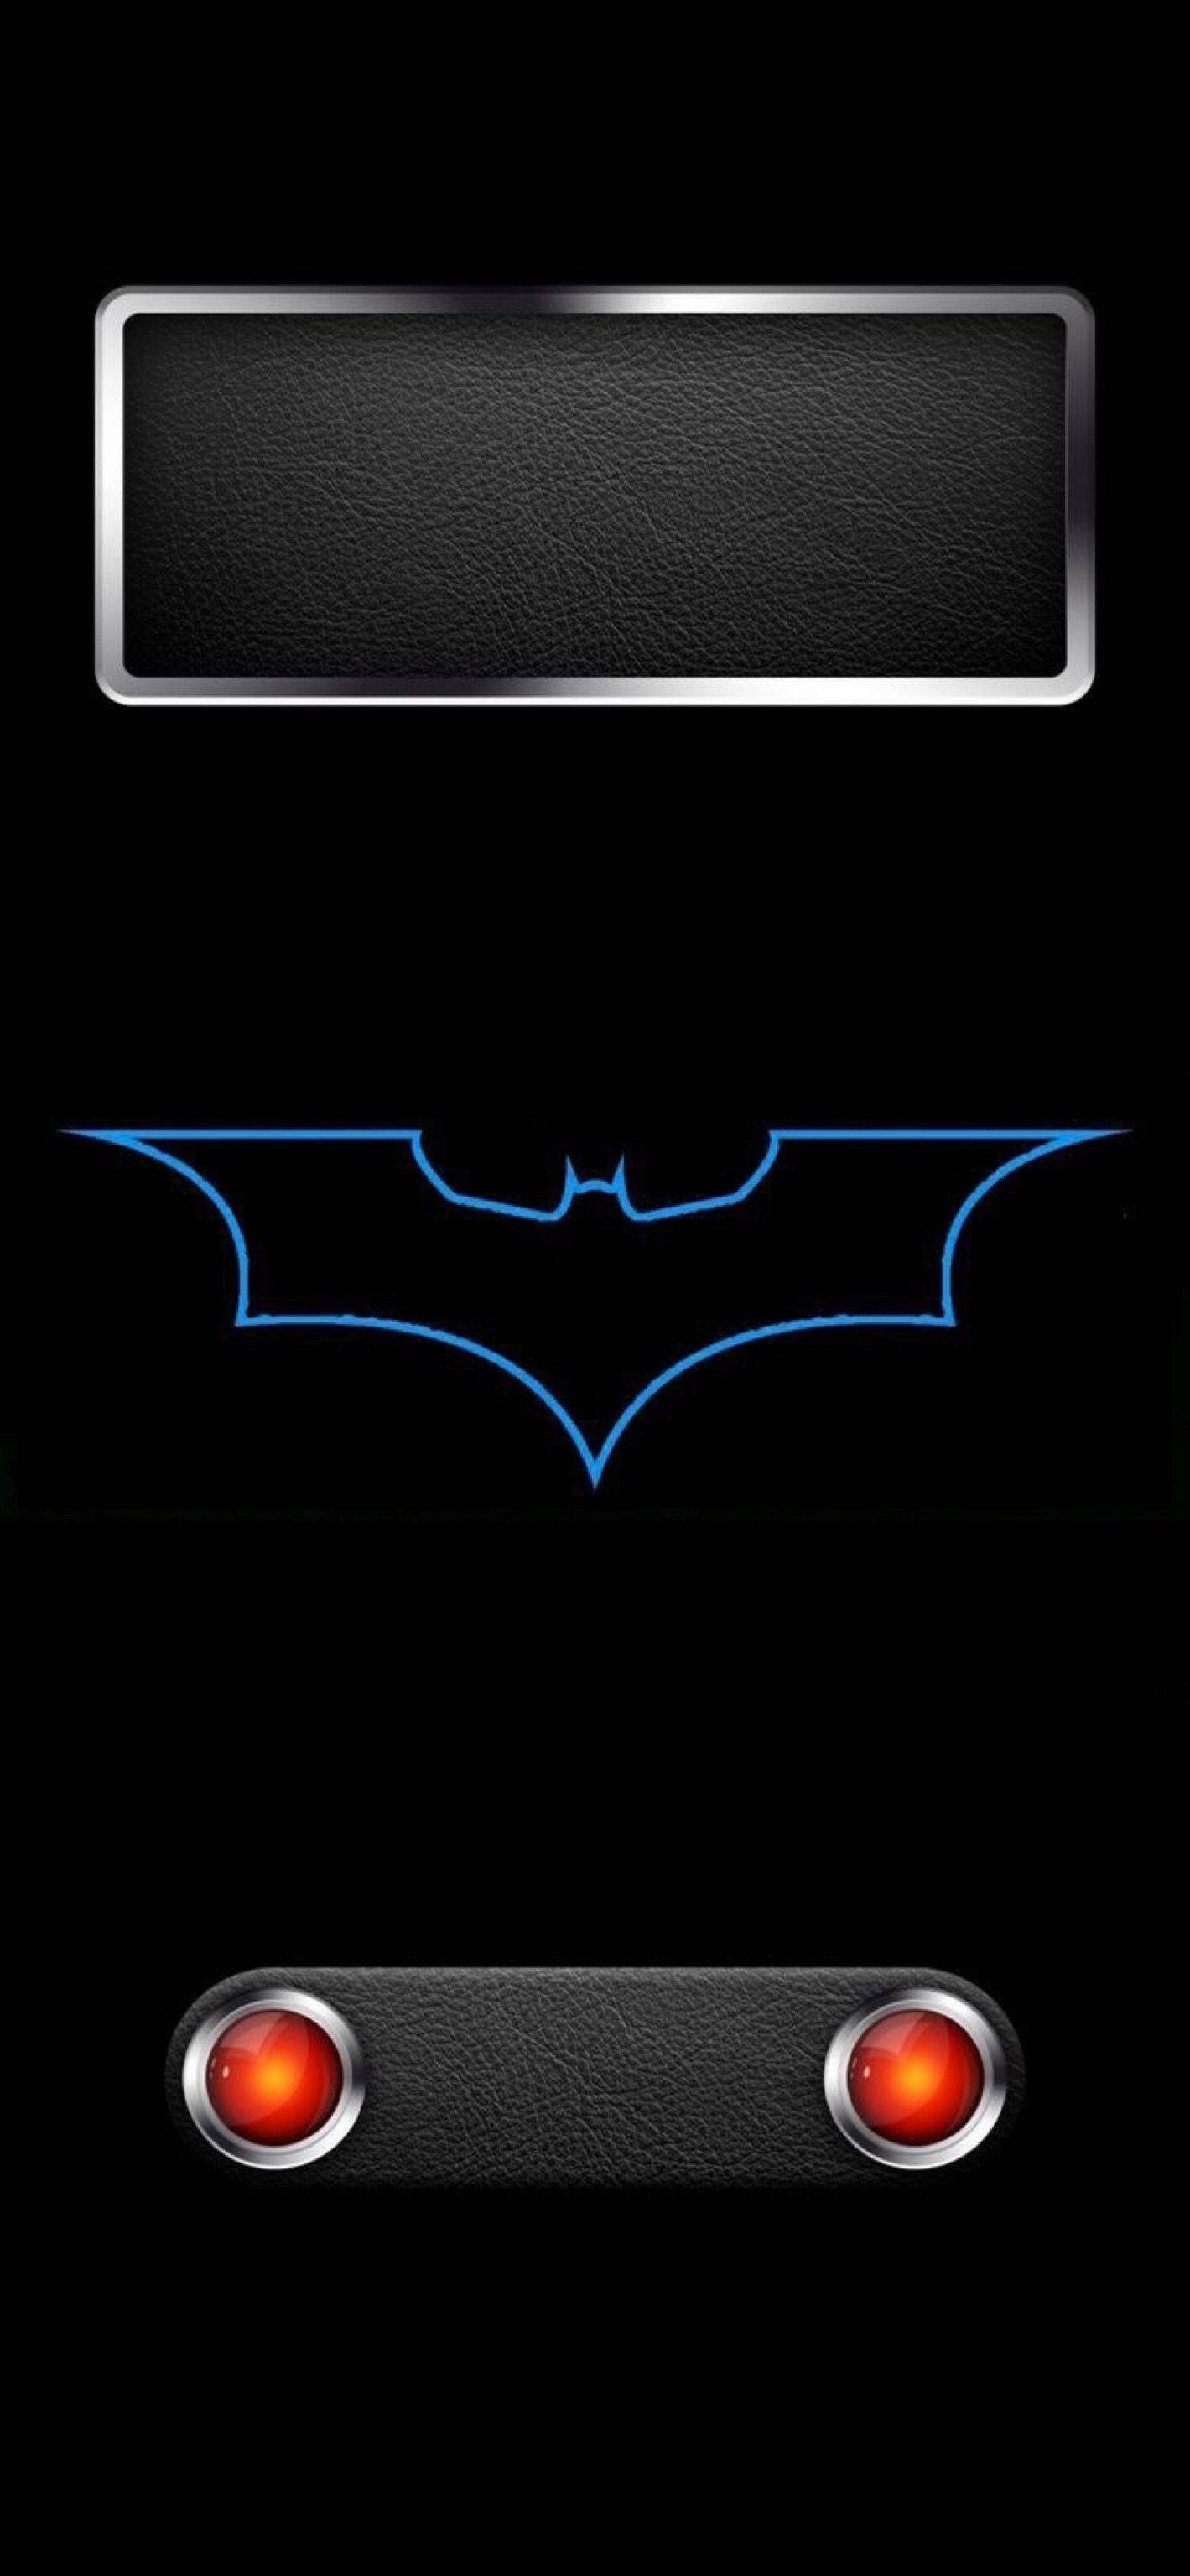 Top 999+ Batman Iphone X Wallpapers Full HD, 4K✅Free to Use